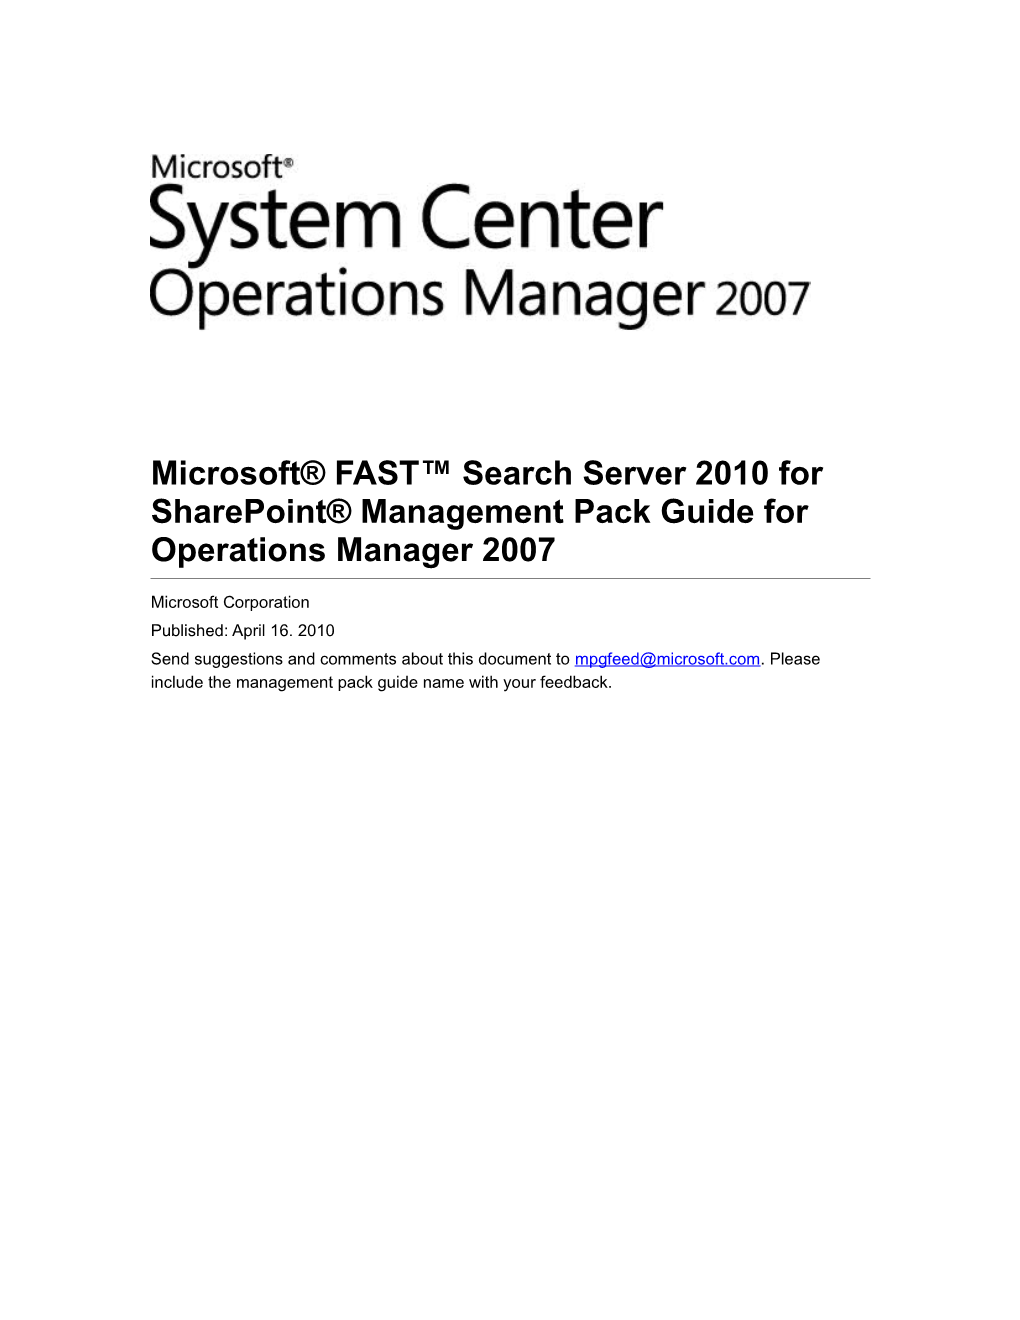 Microsoft FAST Search Server 2010 for Sharepoint Management Pack Guide for Operations